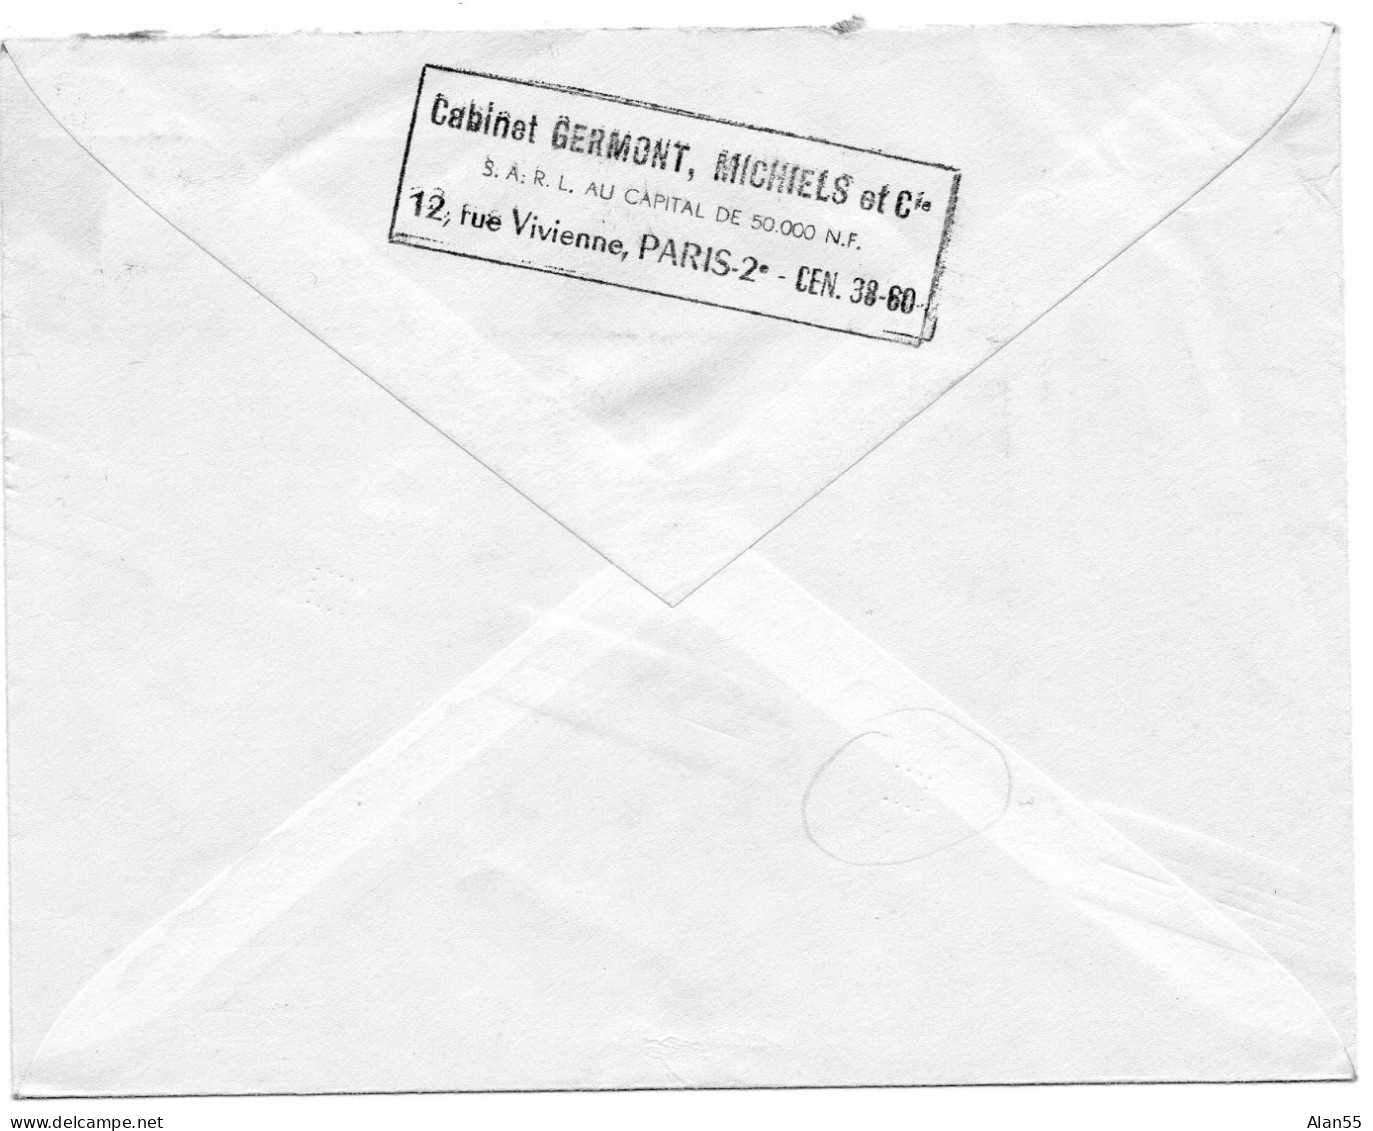 FRANCE.1962. 1re MARQUE INDEXATION COURRIER A SEC. "POINT GAMMA" ECOLE POLYTECHNIQUE. - Postcode